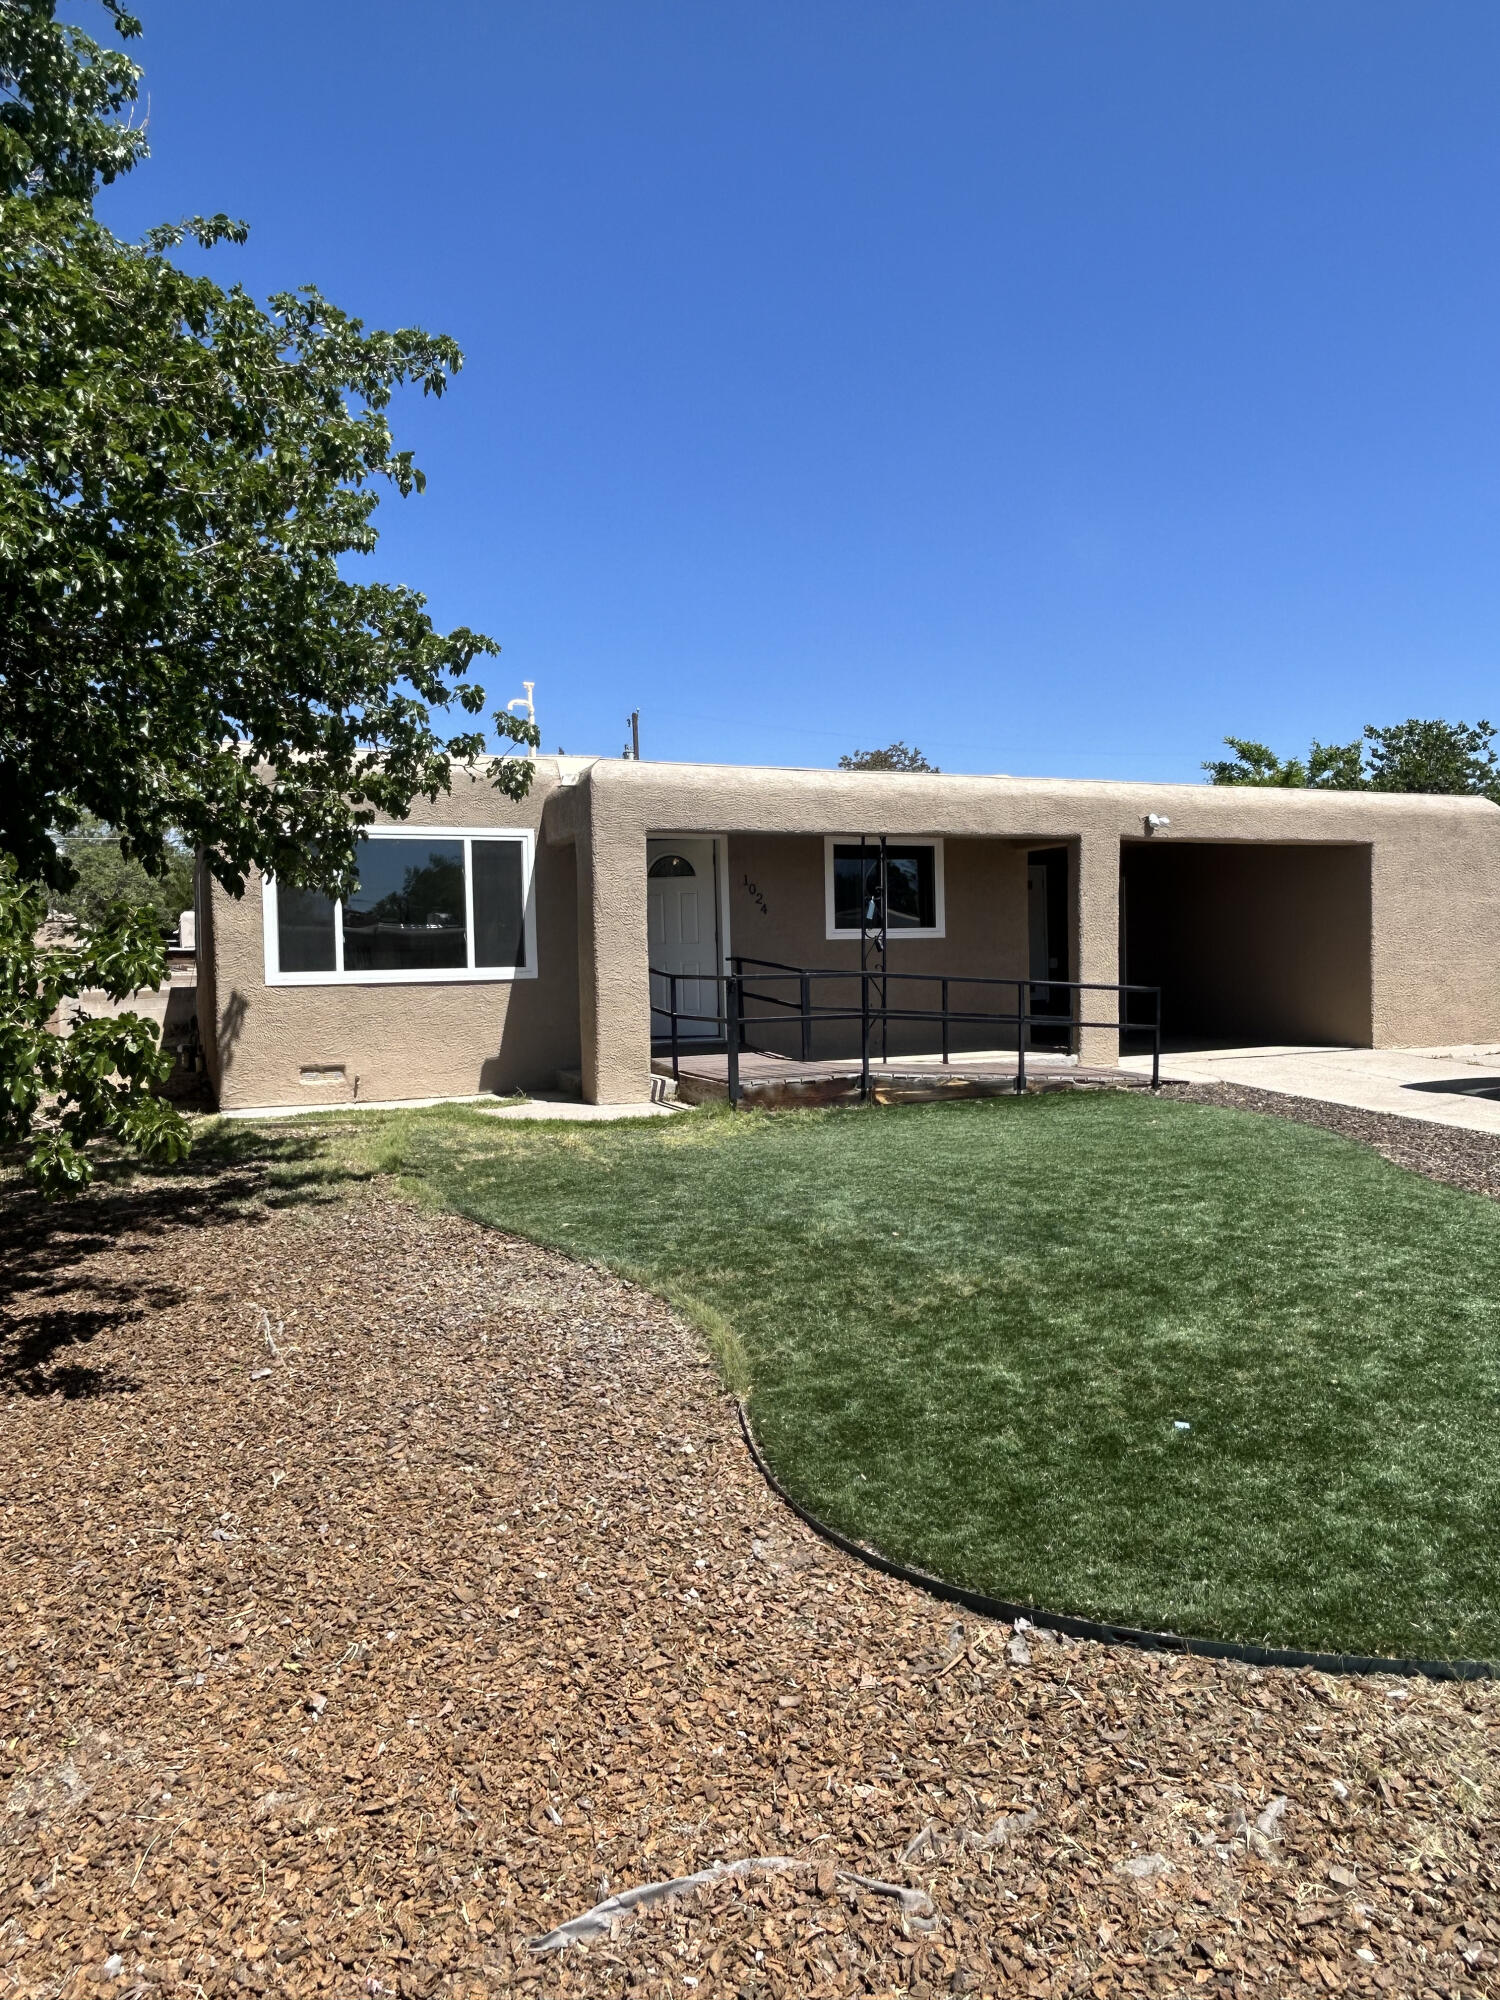 A newly remodeled 4 bedroom 2 bath single family dwelling in a quiet Albuquerque neighborhood. Comes with a 14' X 24' storage shed with loft space. Supra lockbox, showing by appointment only.